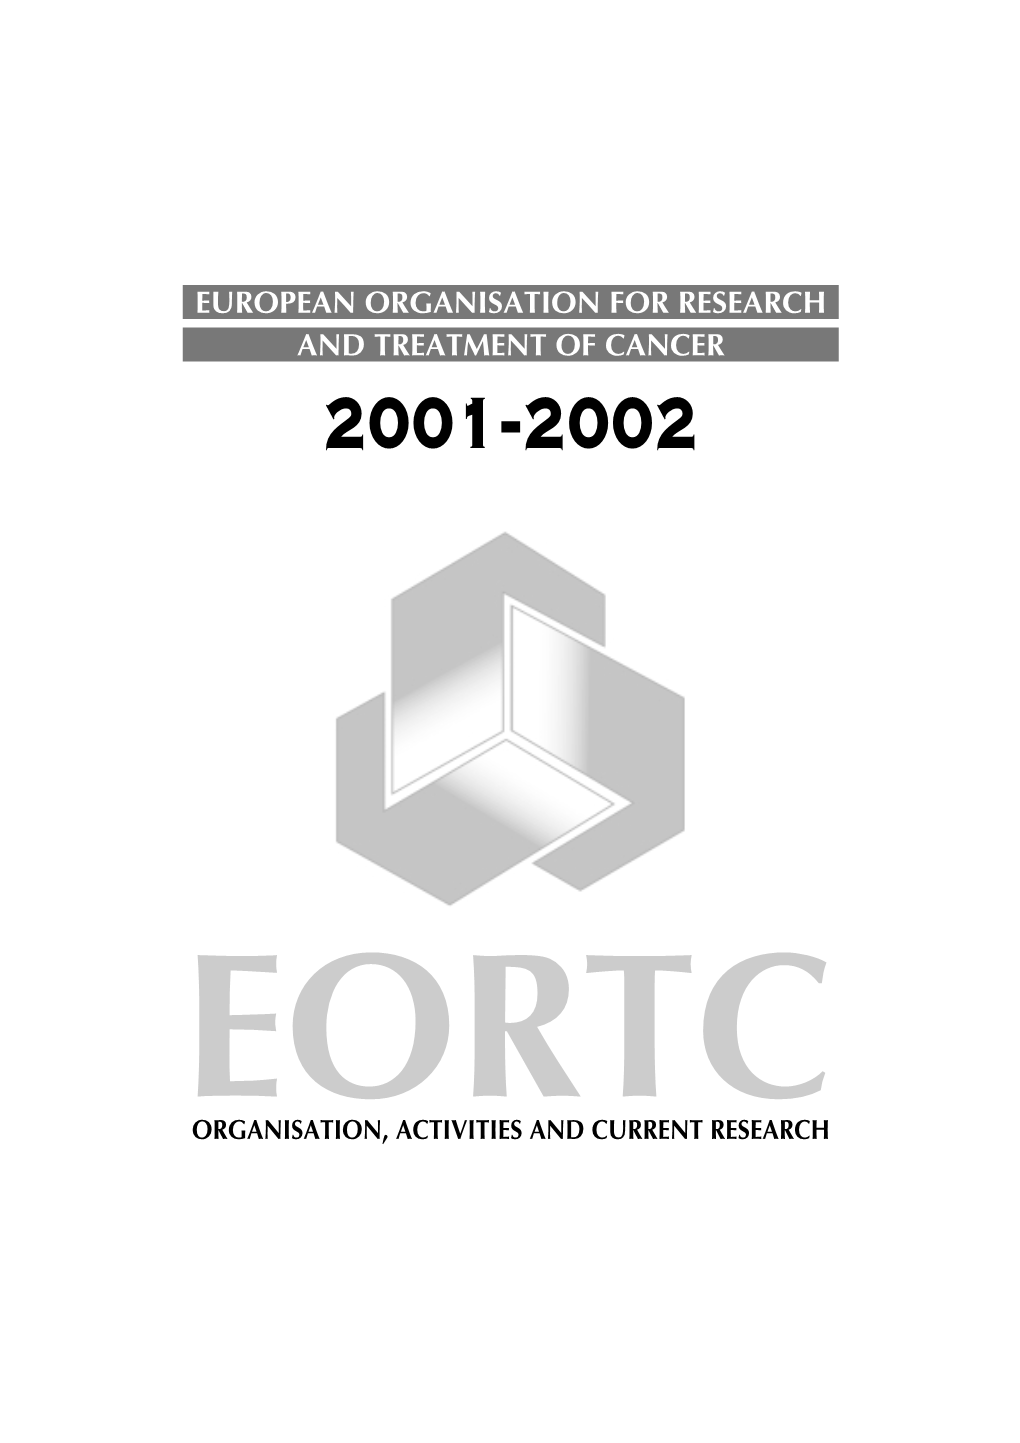 European Organisation for Research and Treatment of Cancer 2001-2002